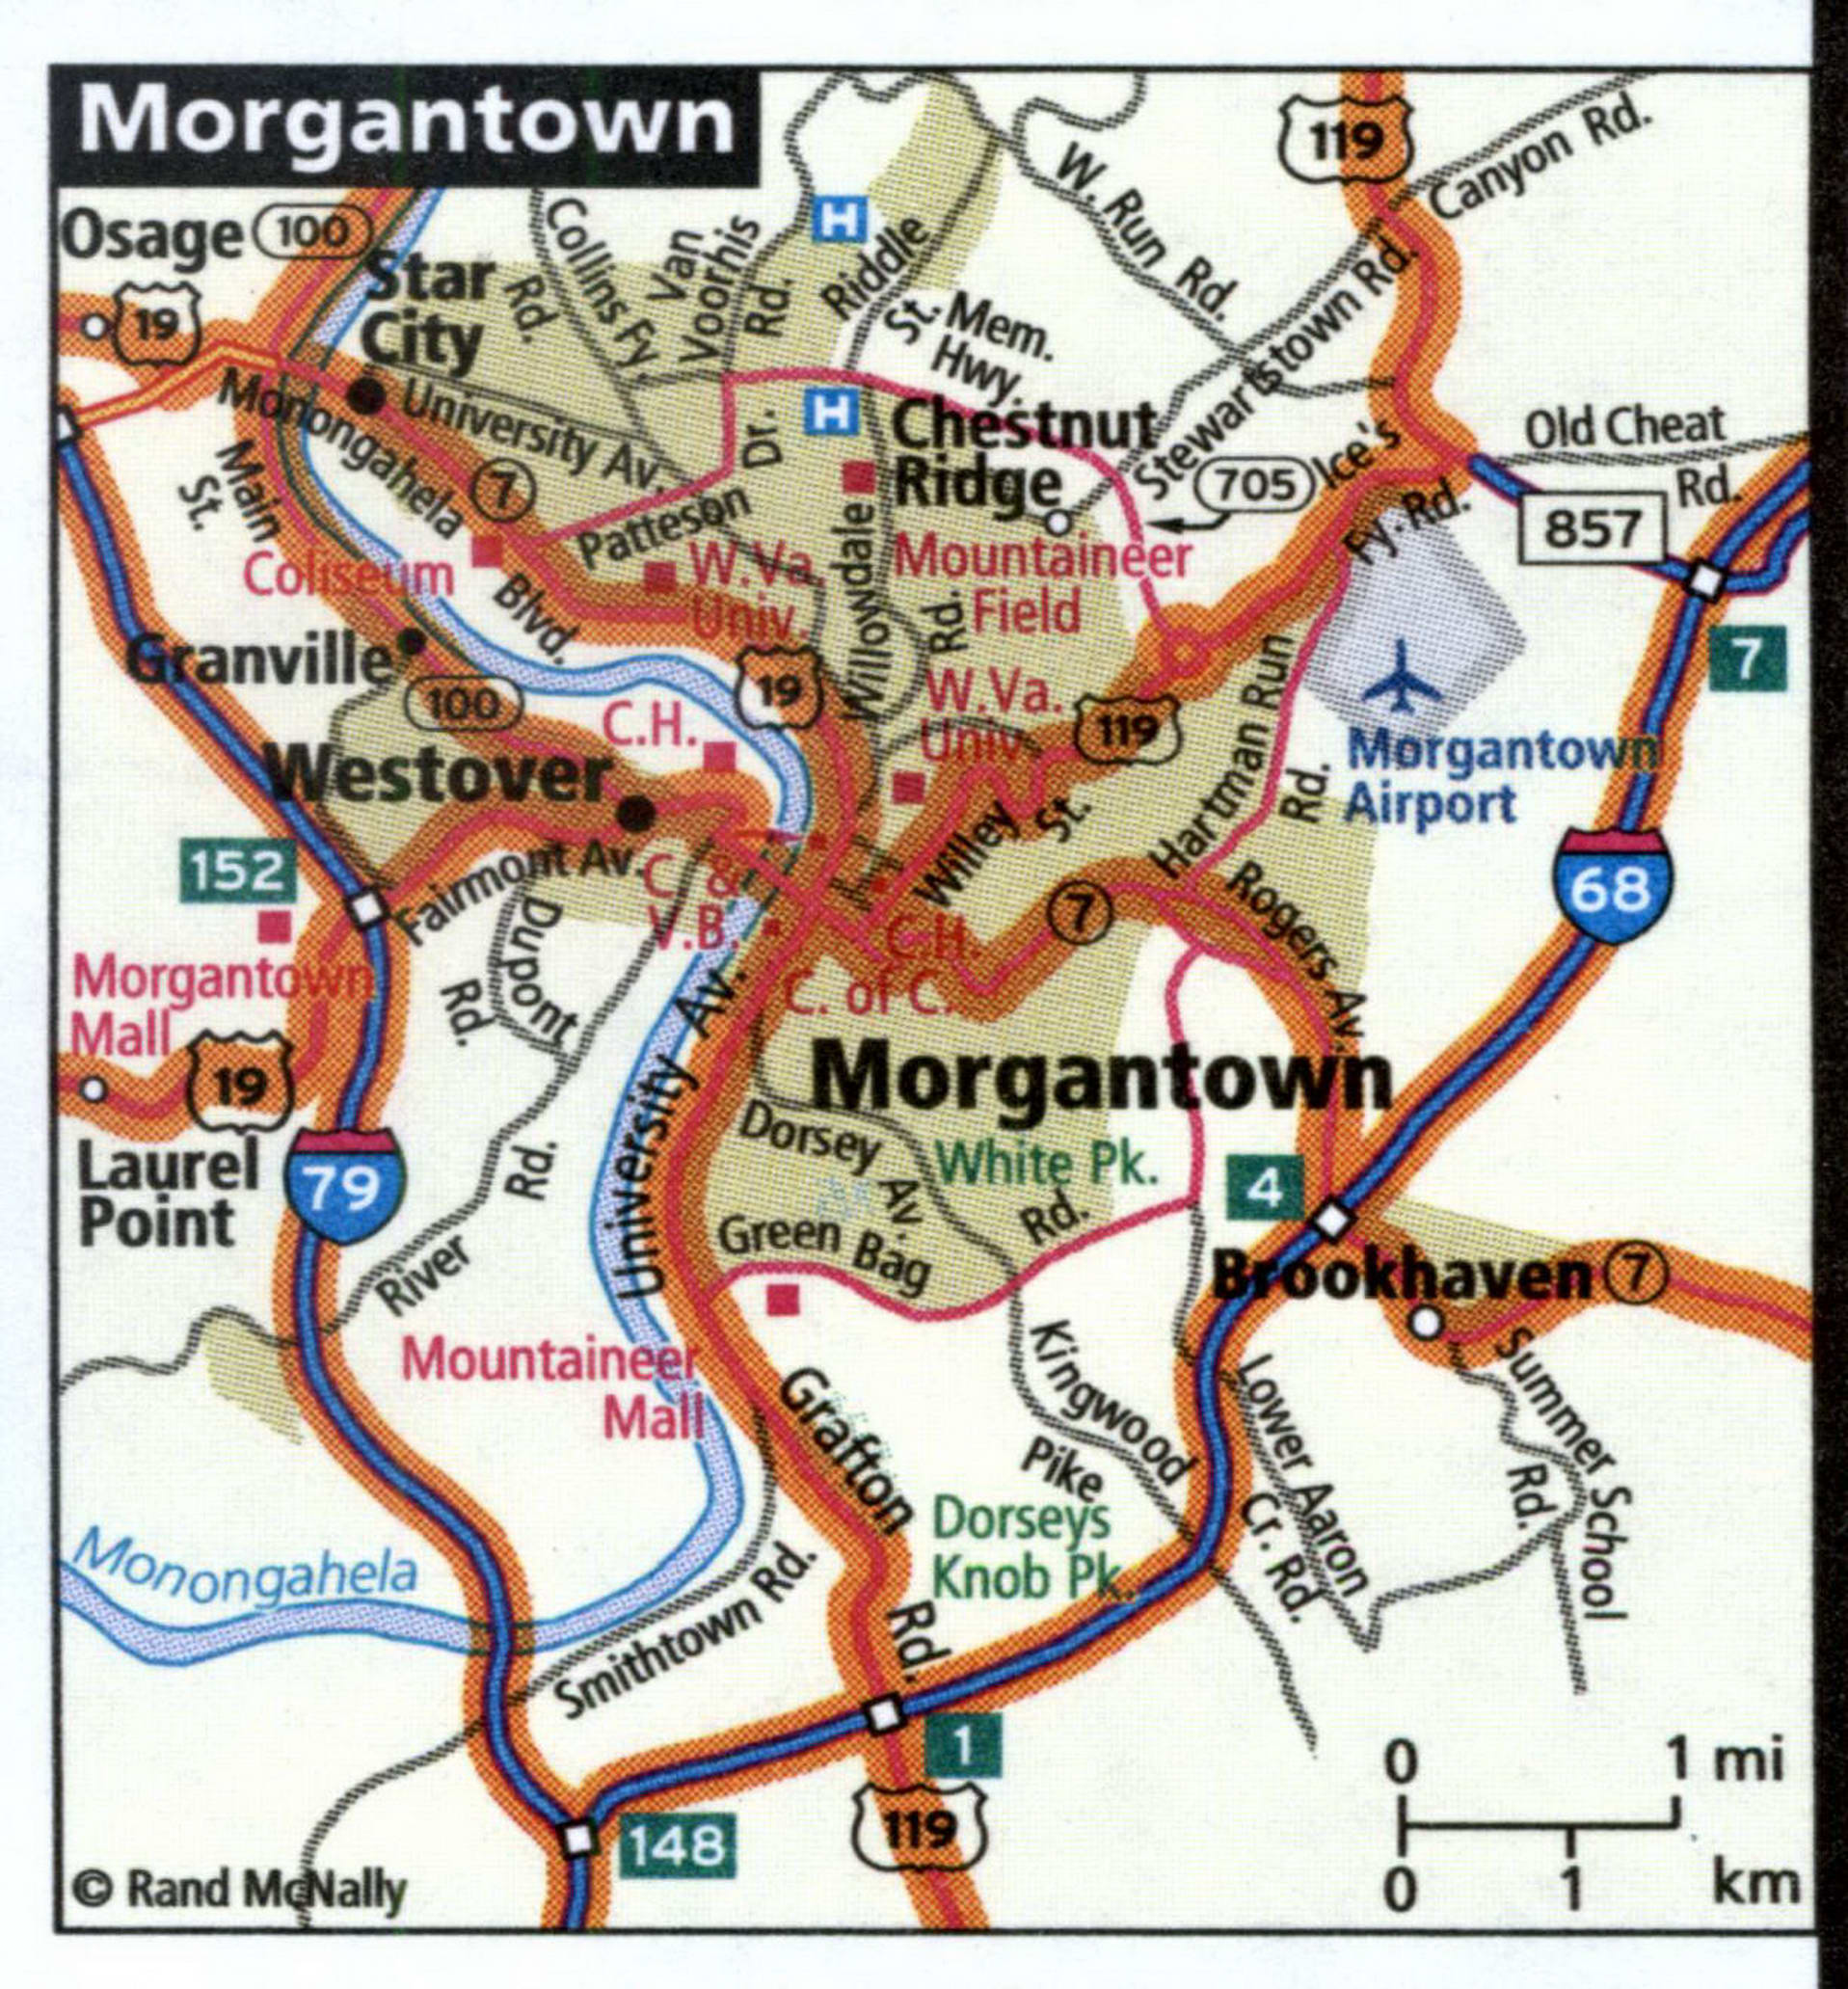 Morgantown city map for truckers